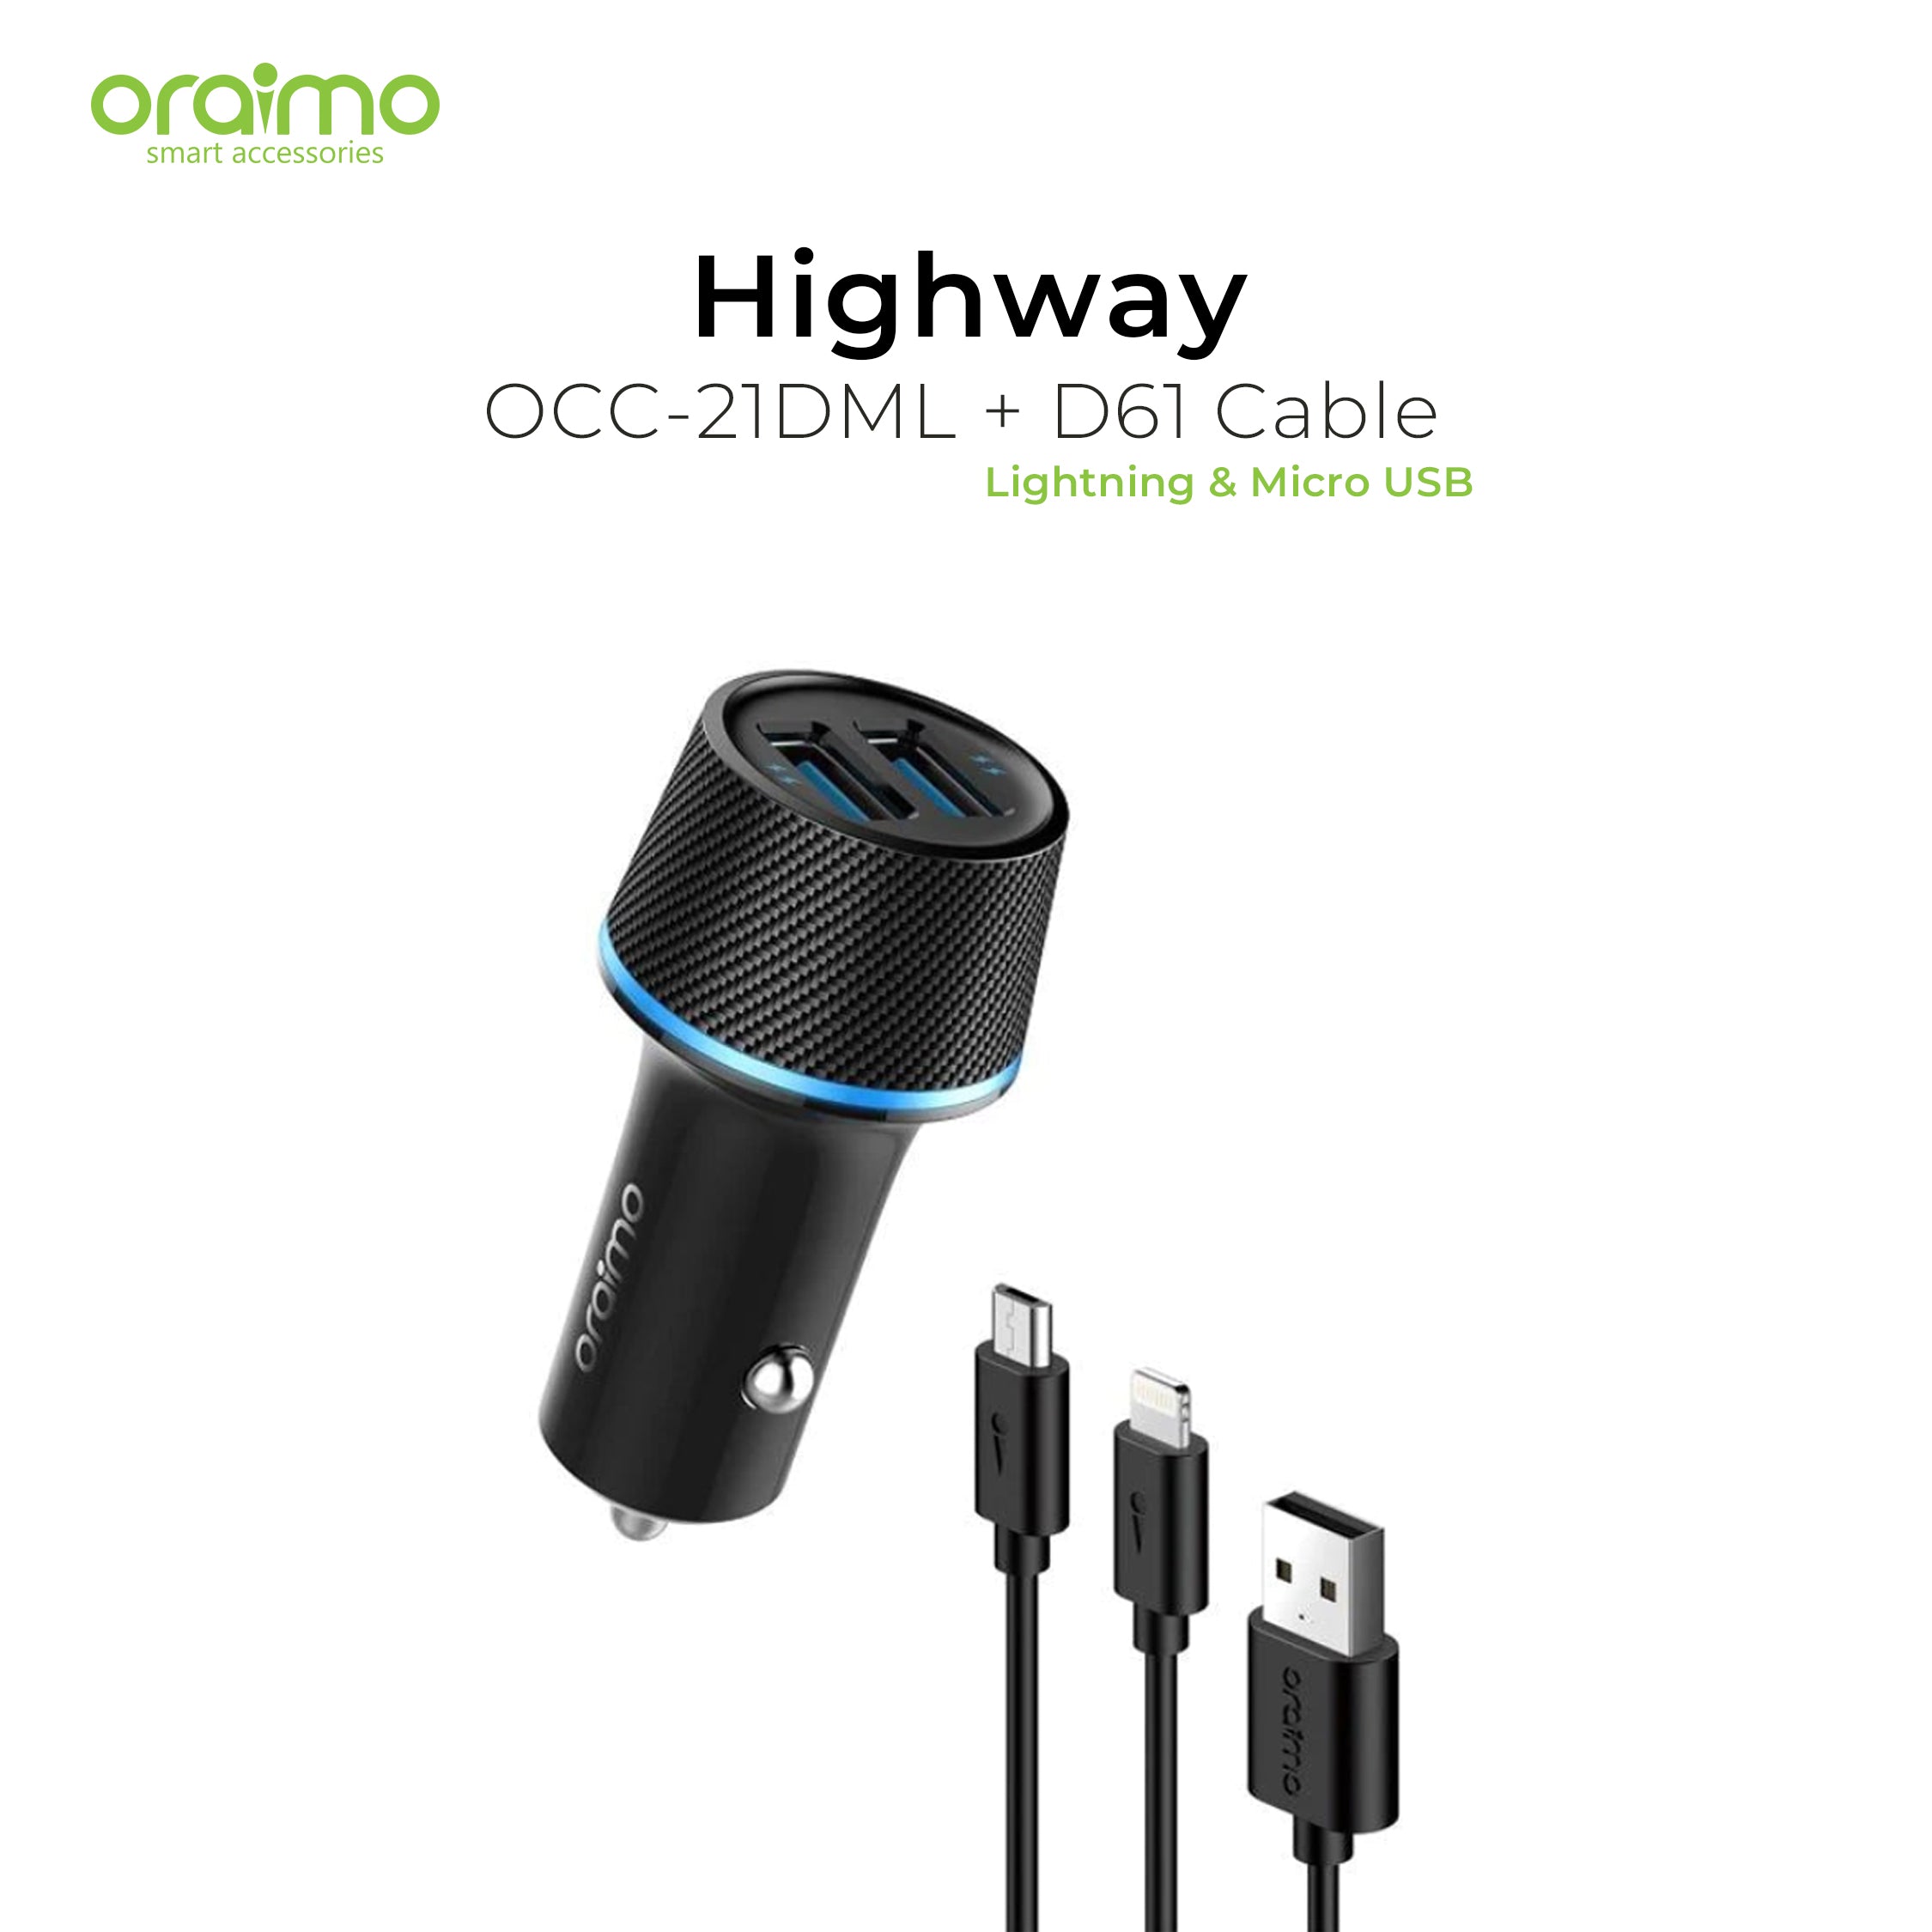 Oraimo Highway Car Charger OCC-21DML Kit